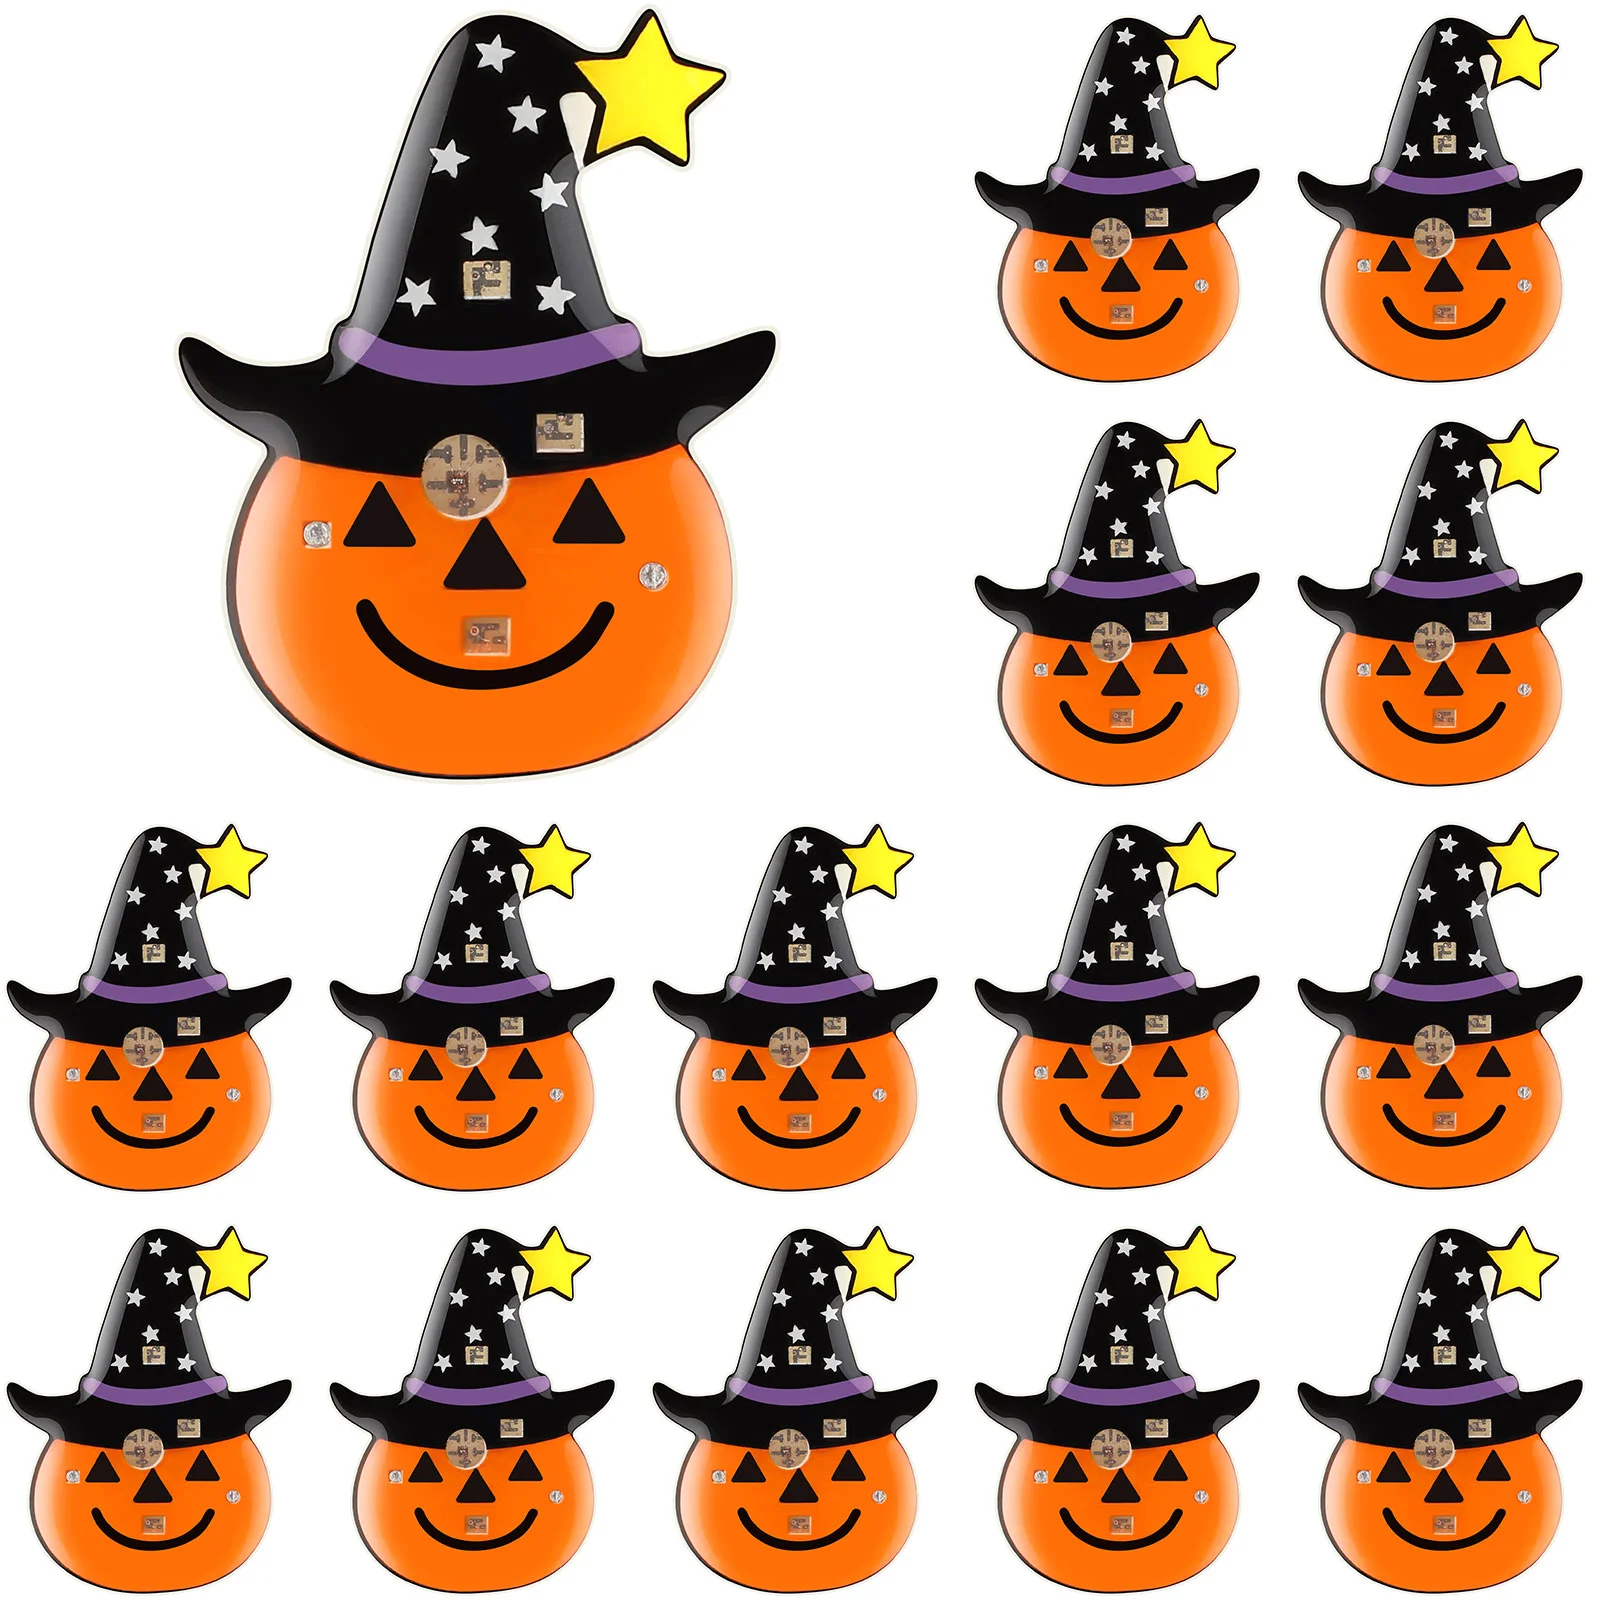 

15 Pcs Halloween Brooch Pins Decorative Brooches Gifts Kids Glowing Holiday LED Party Favors Badges